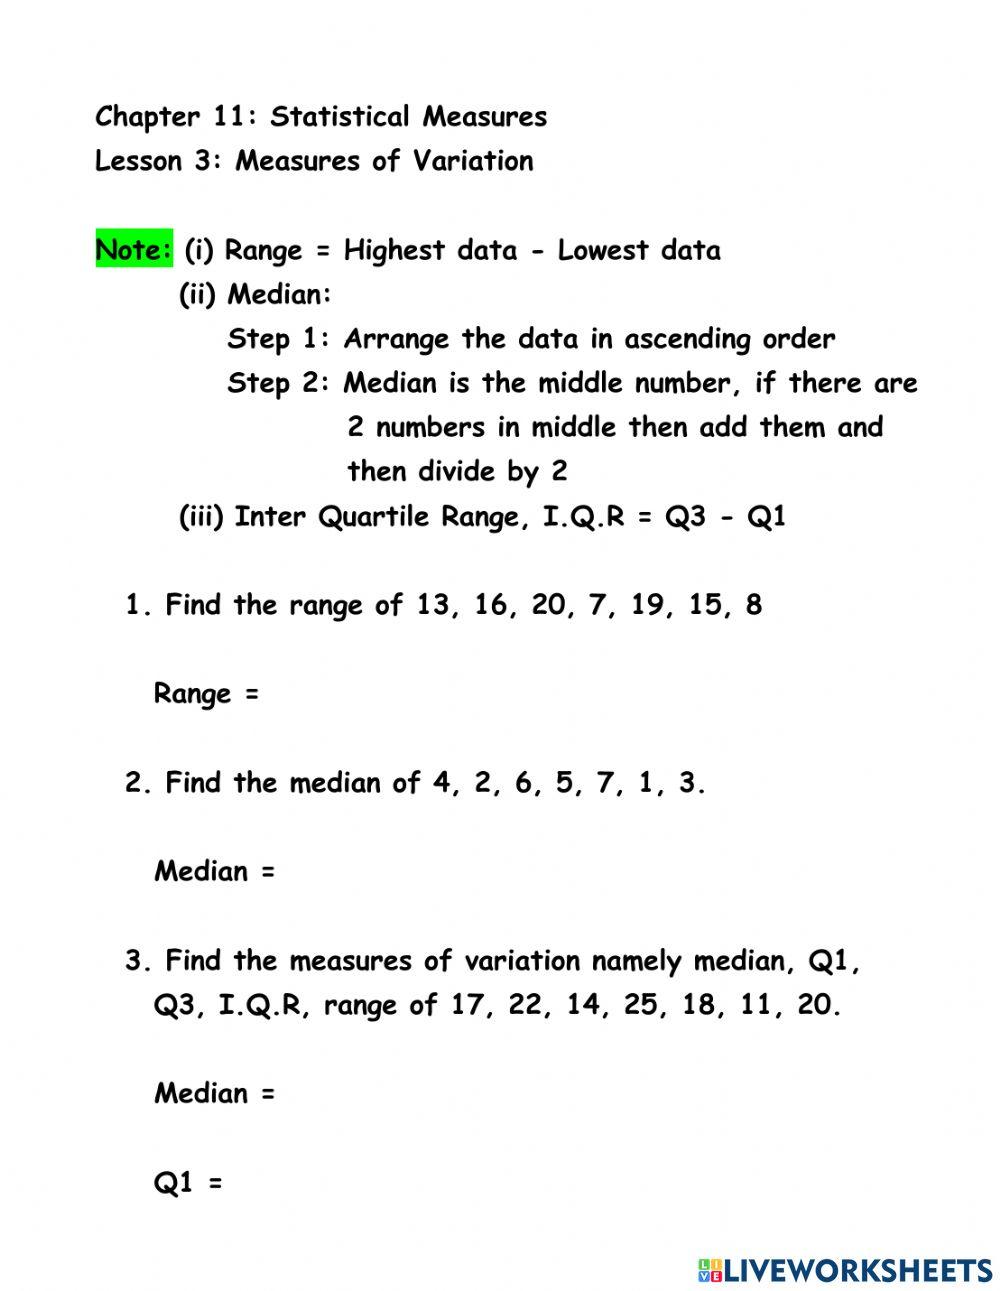 Ch 11 Ln 3 Measures of Variation